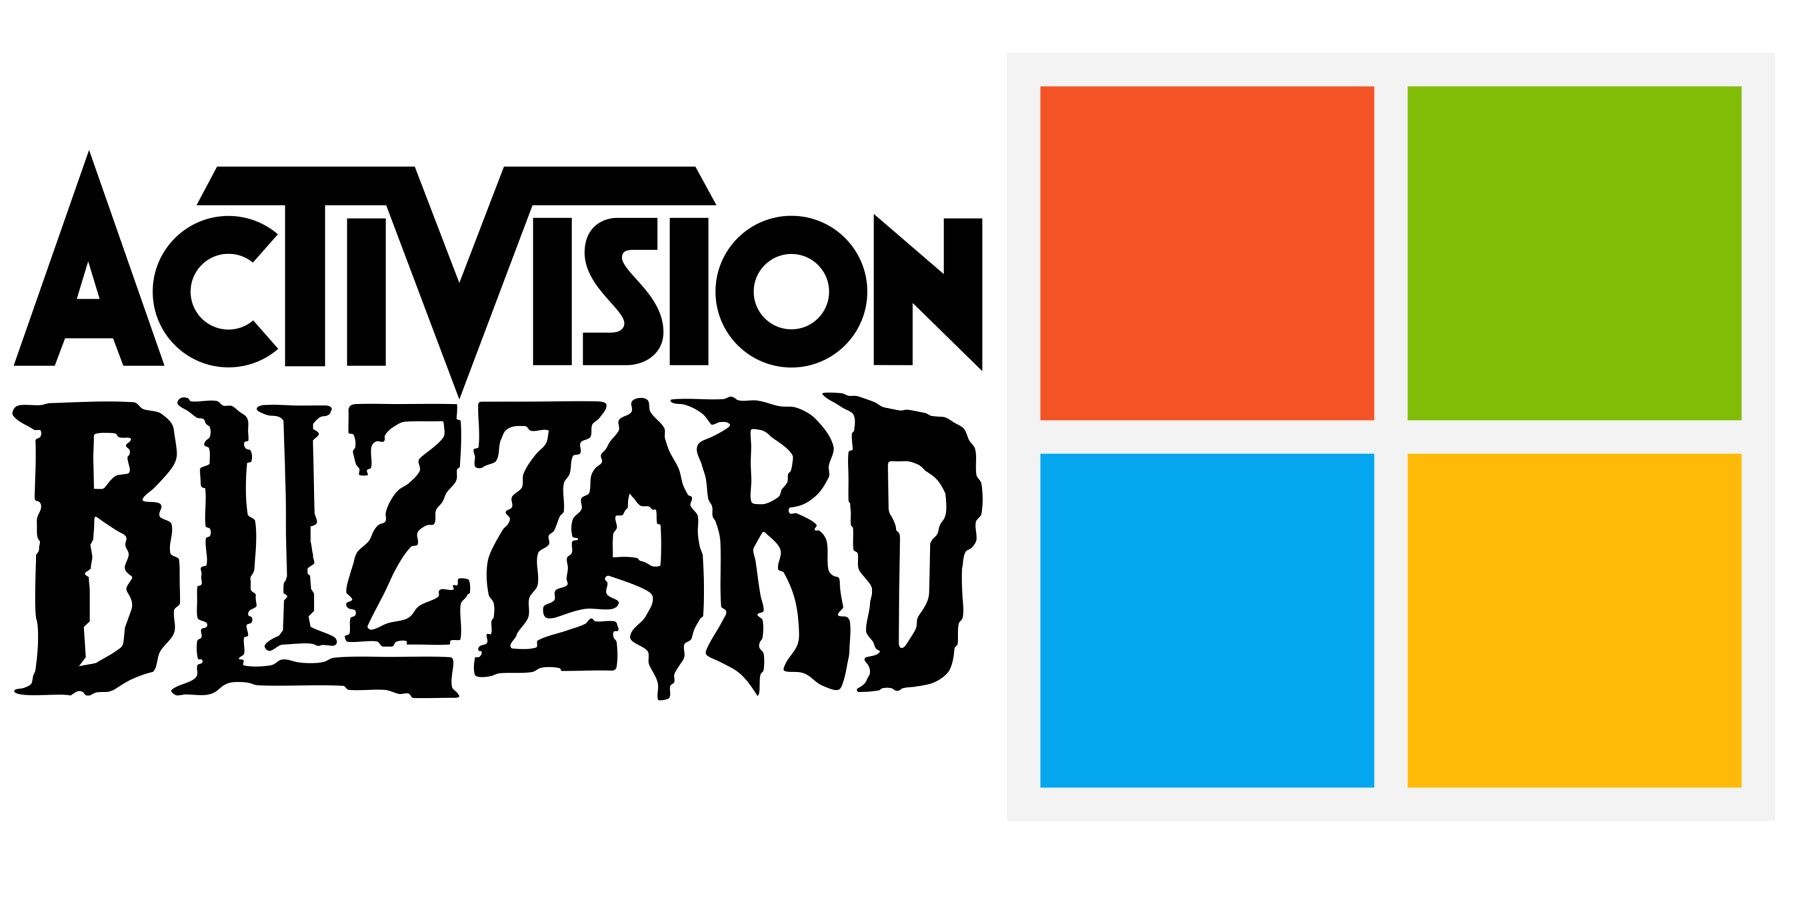 Microsoft's Activision Blizzard Acquisition Approved by Brazilian Regulator  - Sudairy